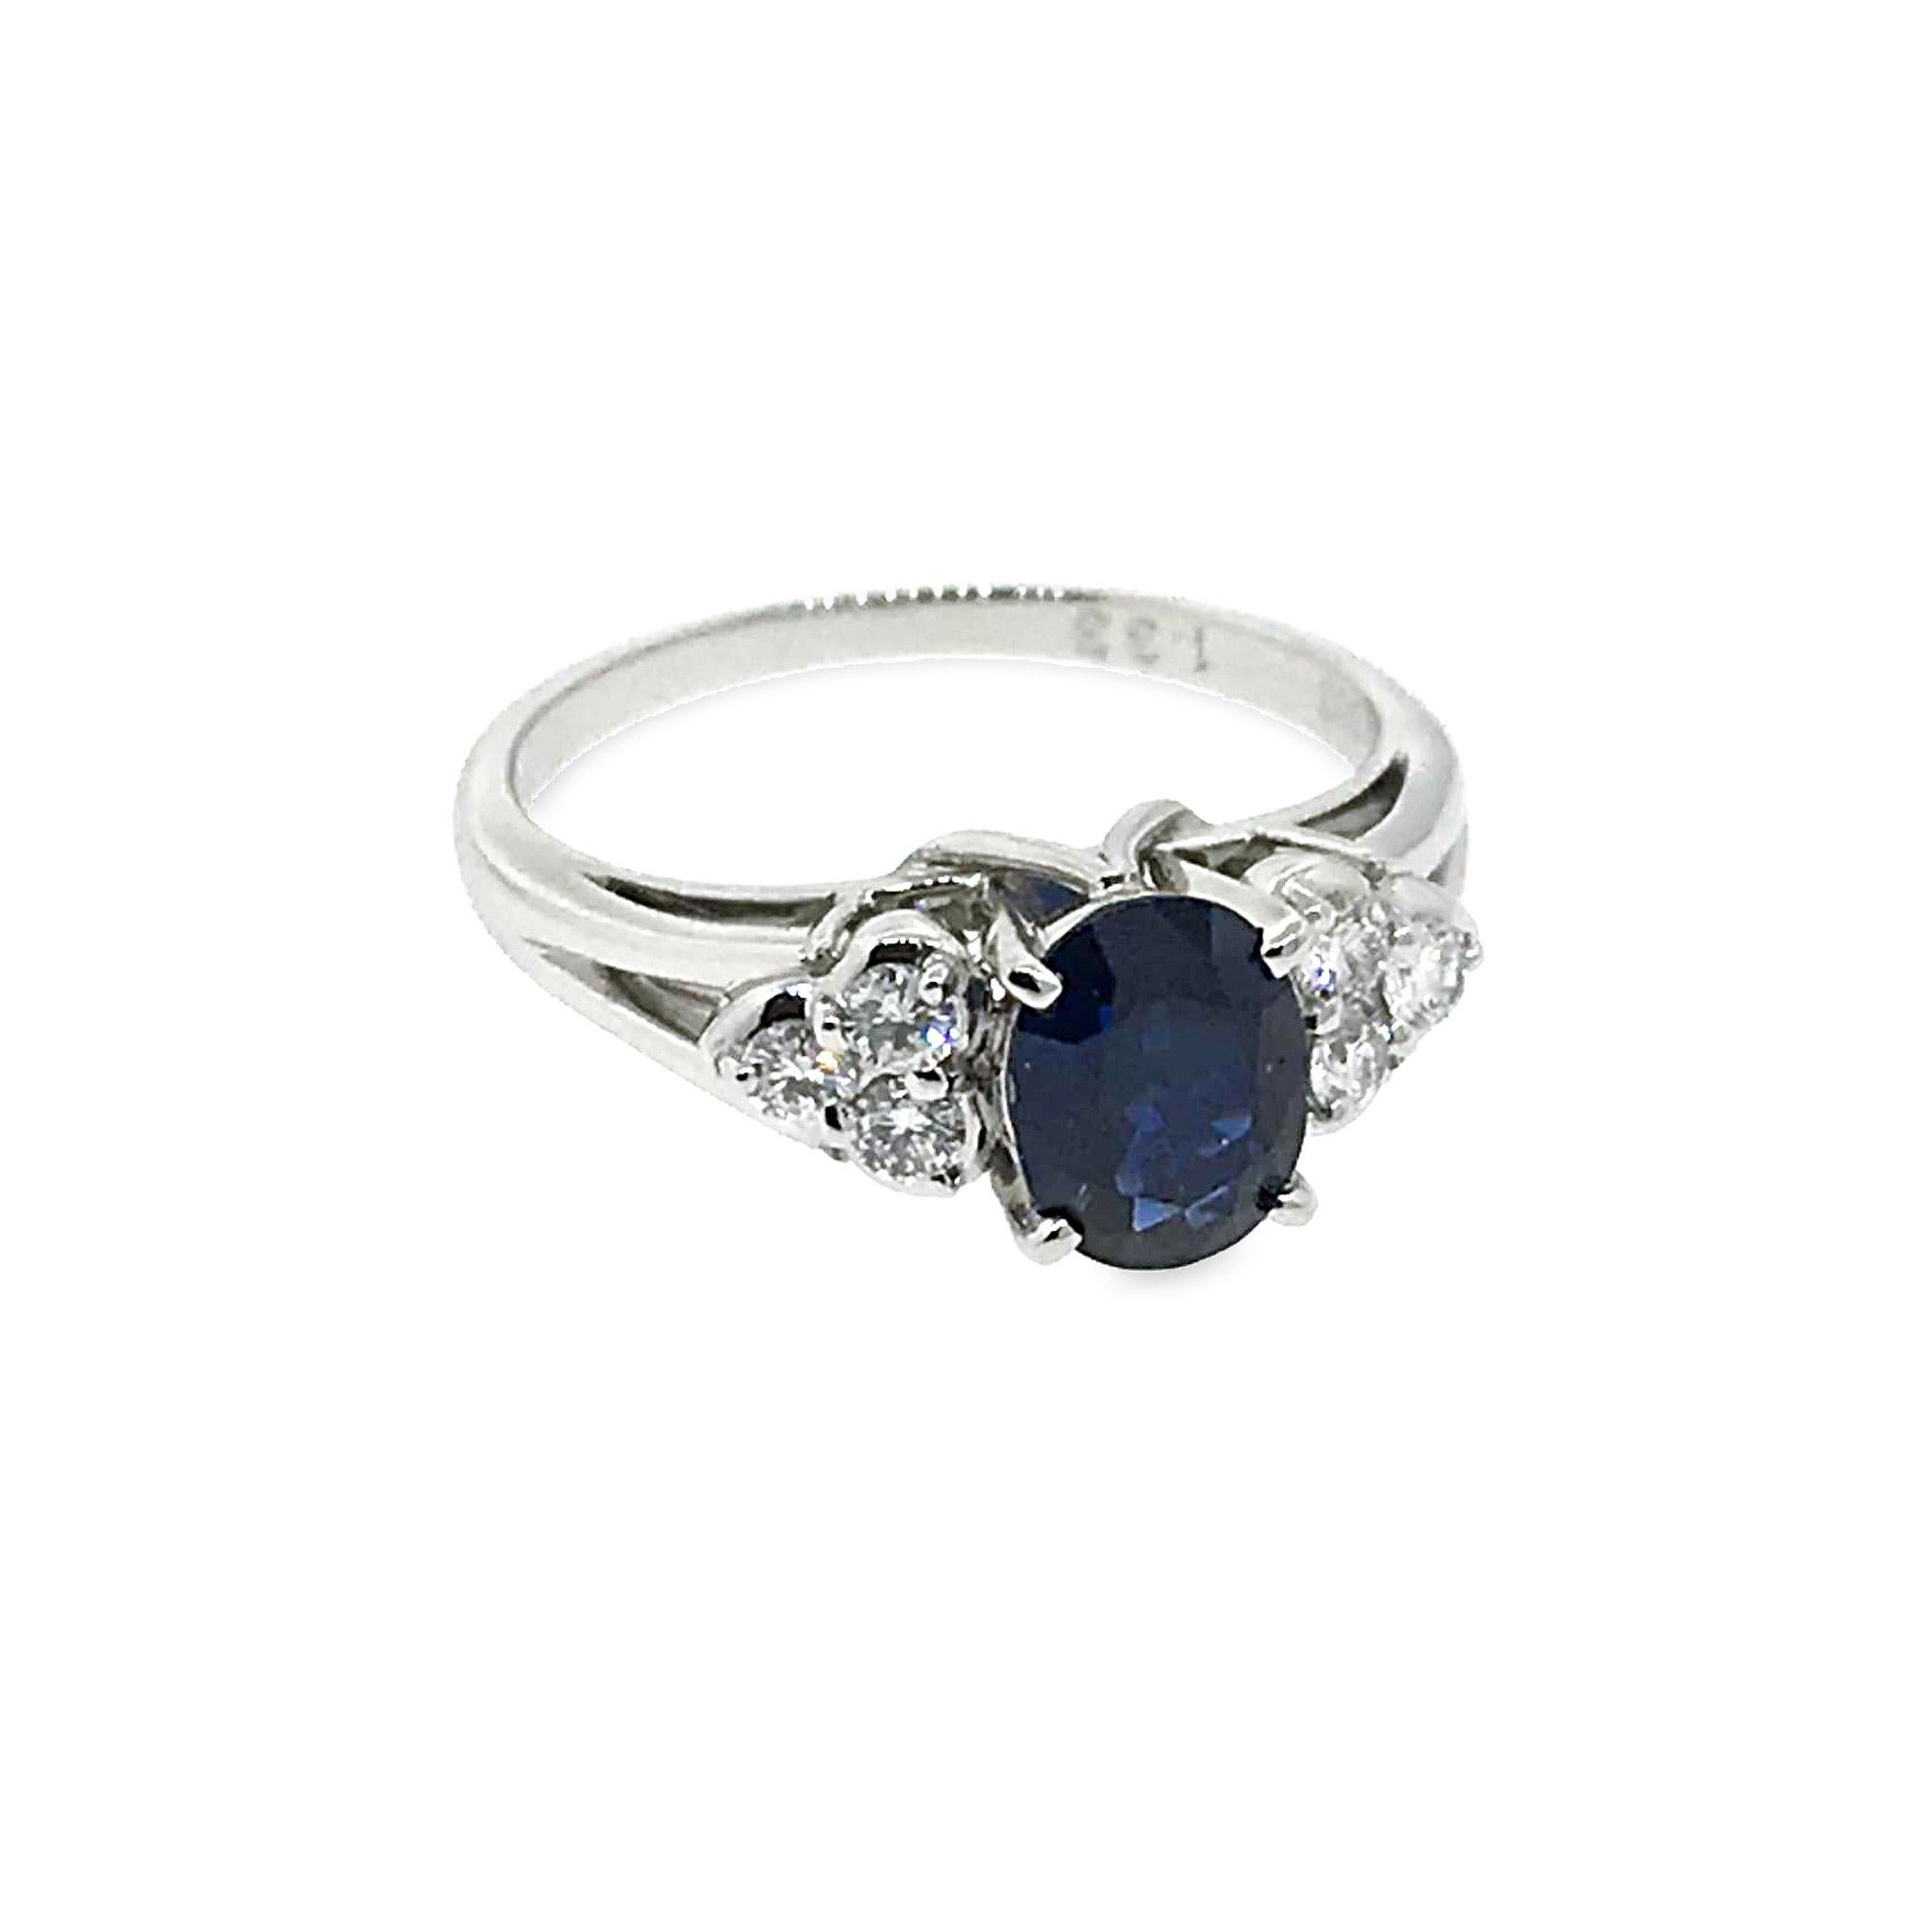 Platinum
Sapphire = 1.33ct twd and Diamond = 0.22ct twd
Total Weight: 5.2 grams
Ring Size: 6.5
